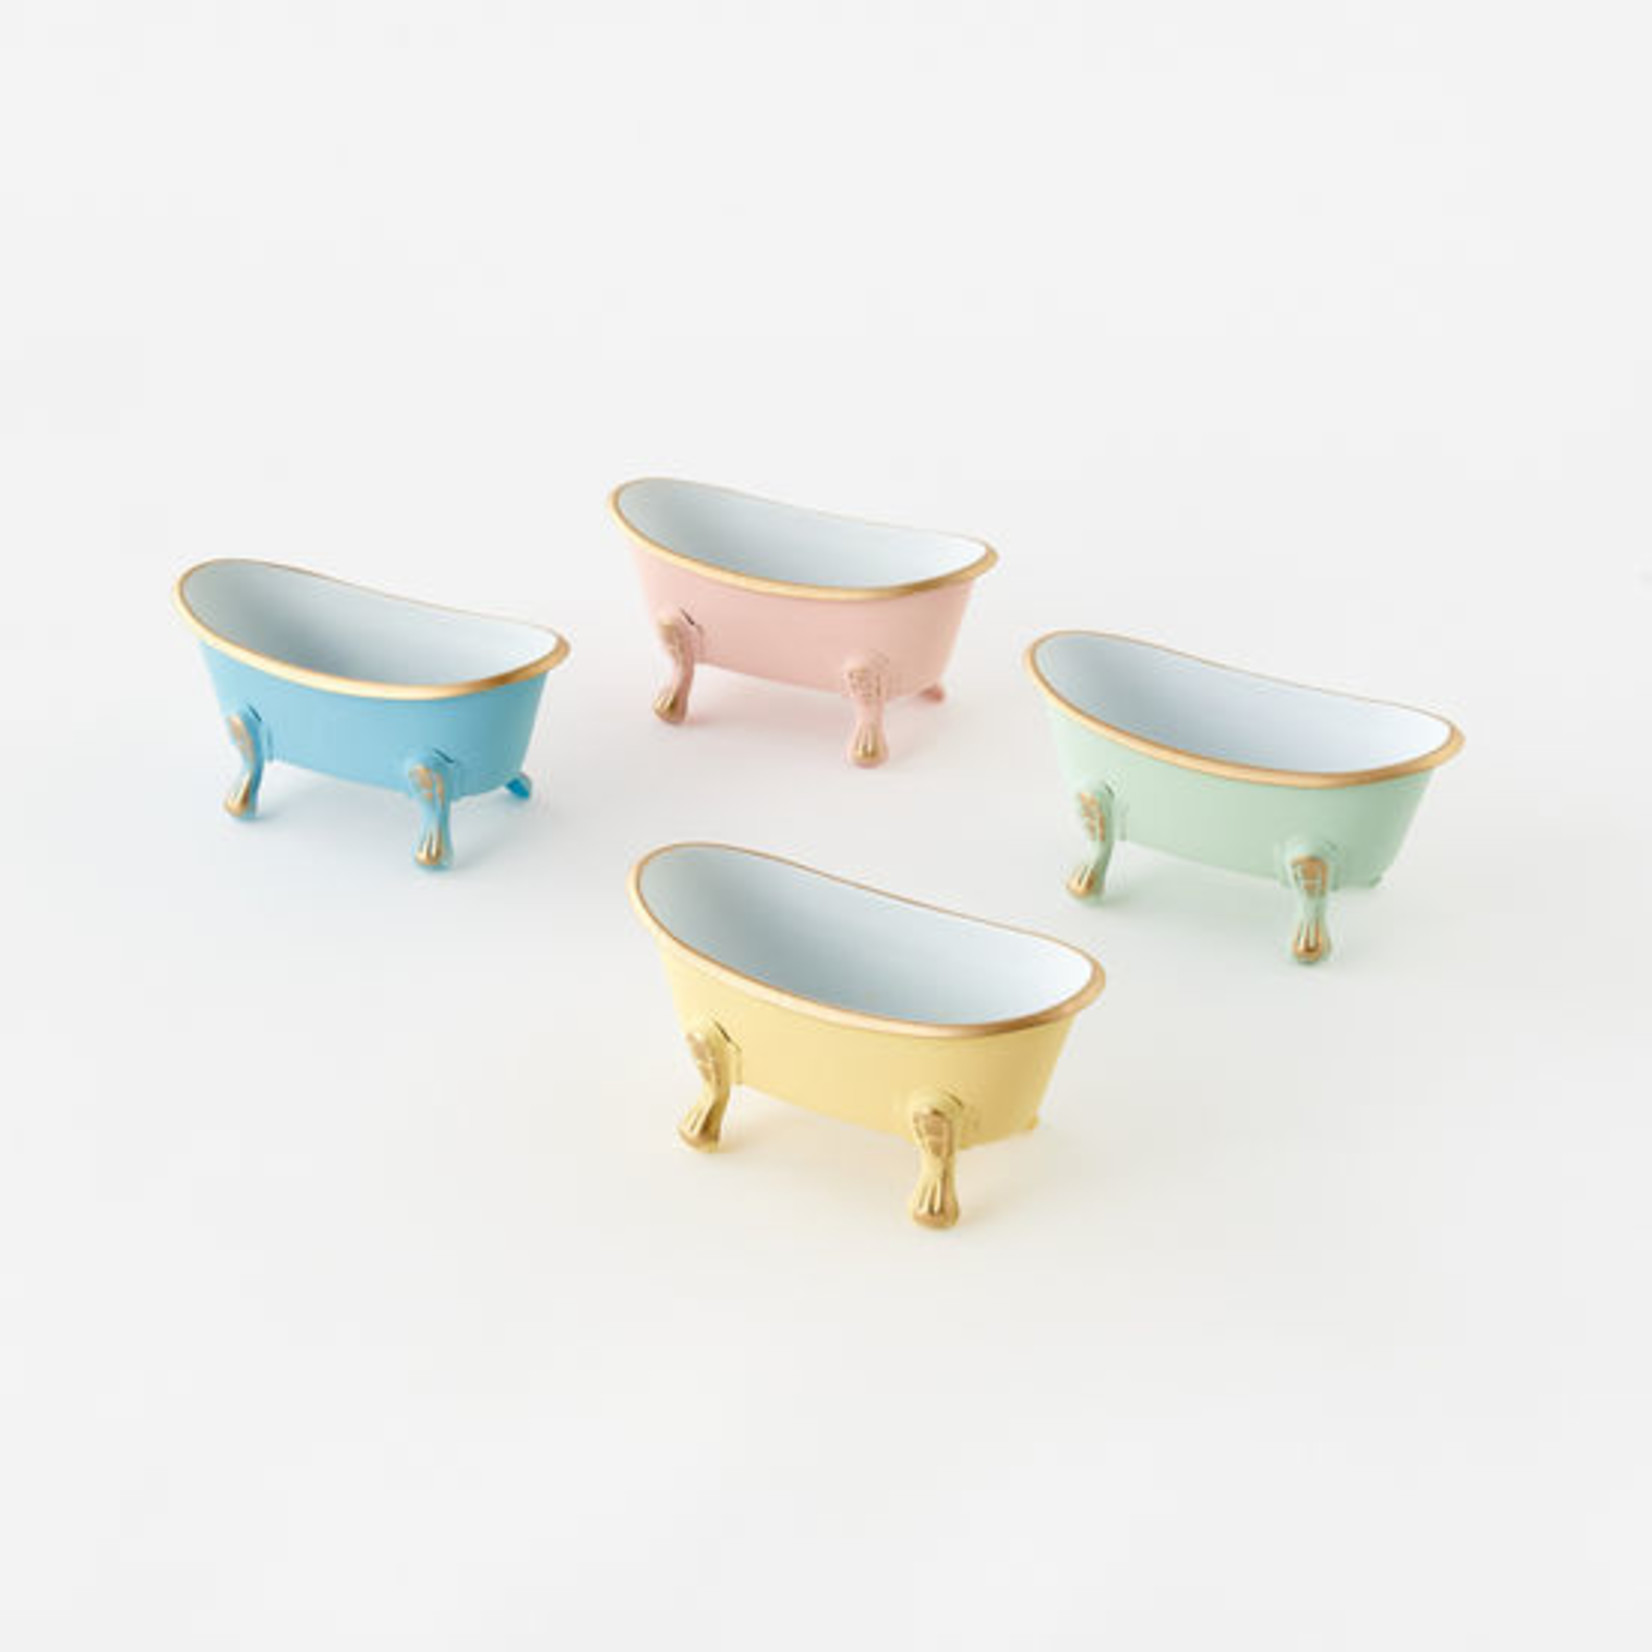 One Hundred 80 degrees Pastel Tub Metal Soap Dishes - 5.5"